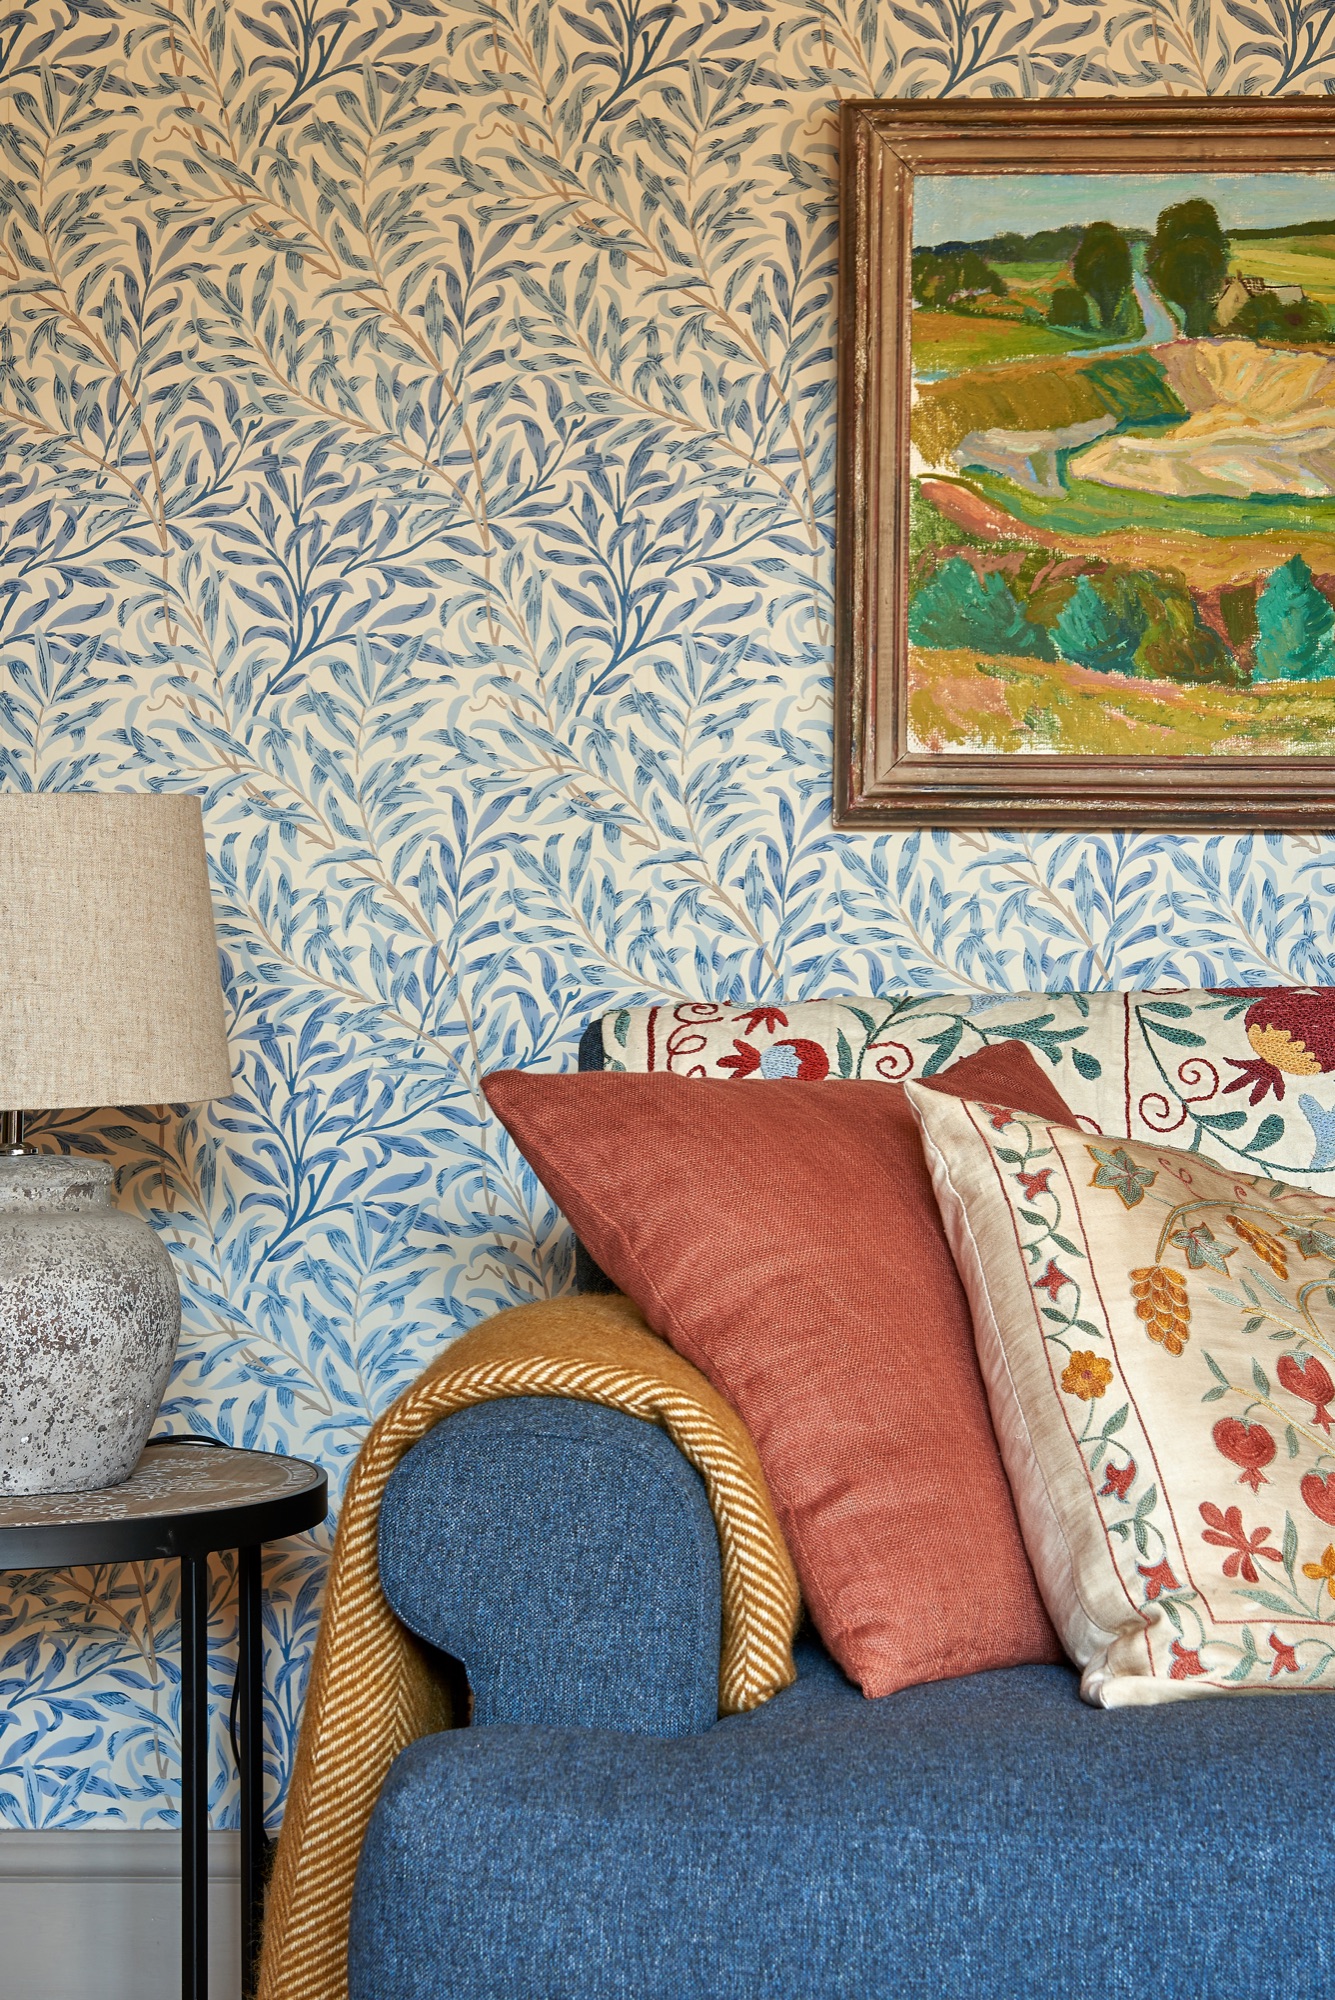 home in the cotswolds,william morris wallpaper, vintage art, sofa.com, colourful interiors